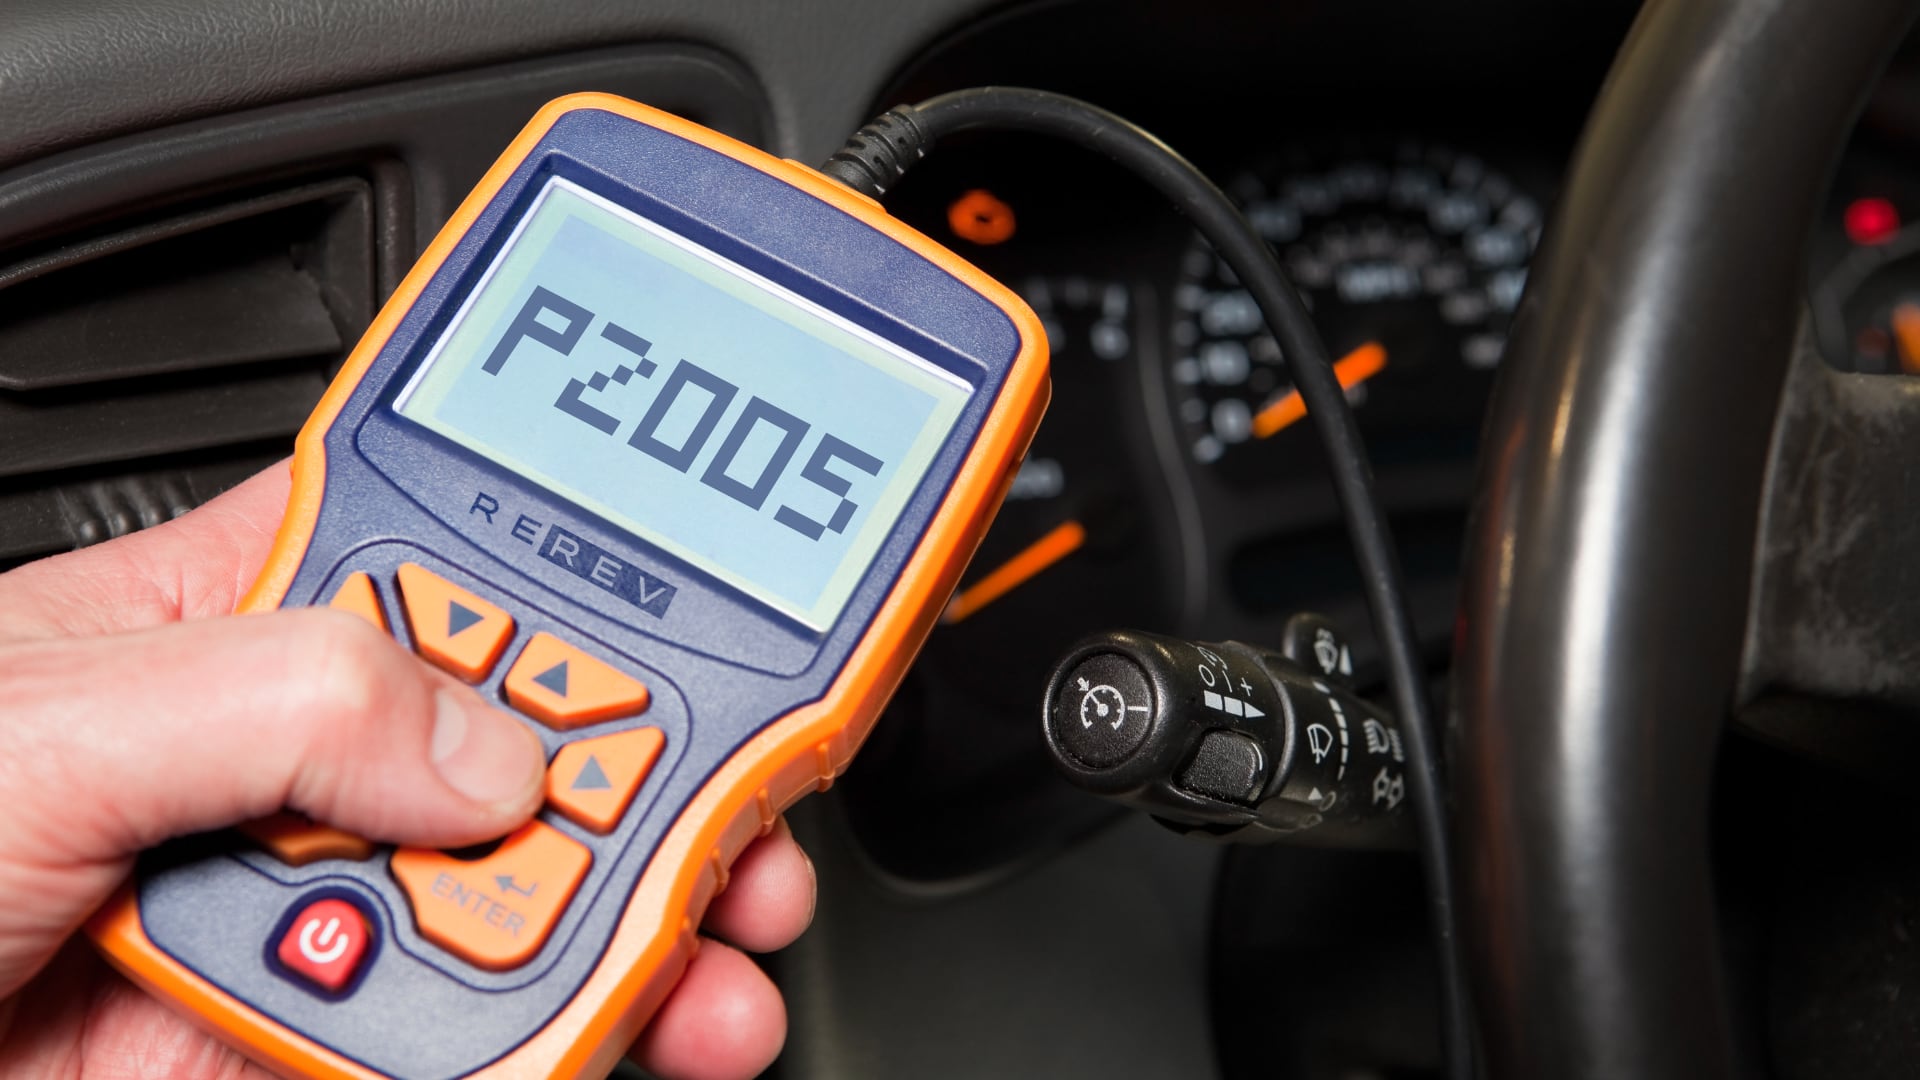 A person holding a car diagnostic tool in a car.